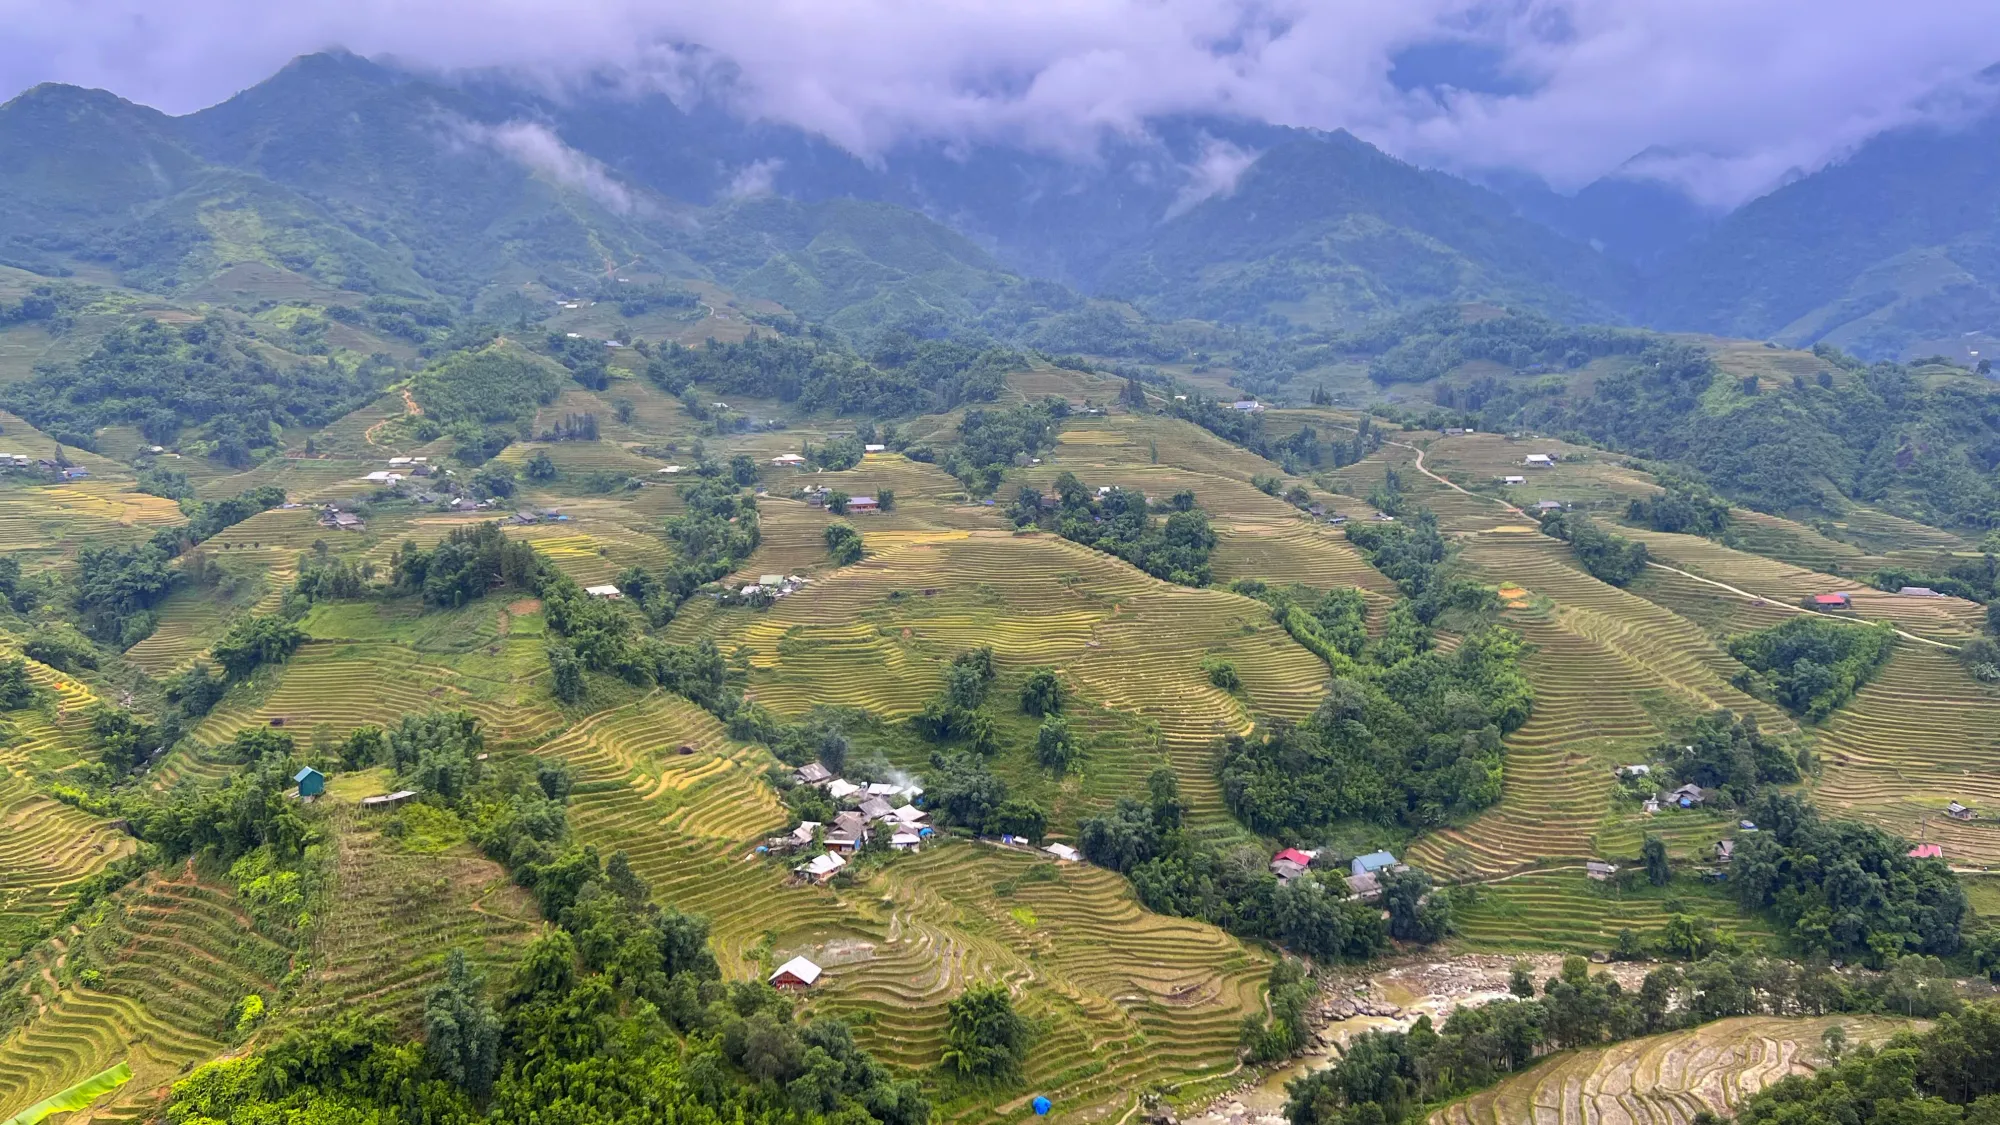 Mountain Ridge lined with rice terraces in Sa Pa, Vietnam